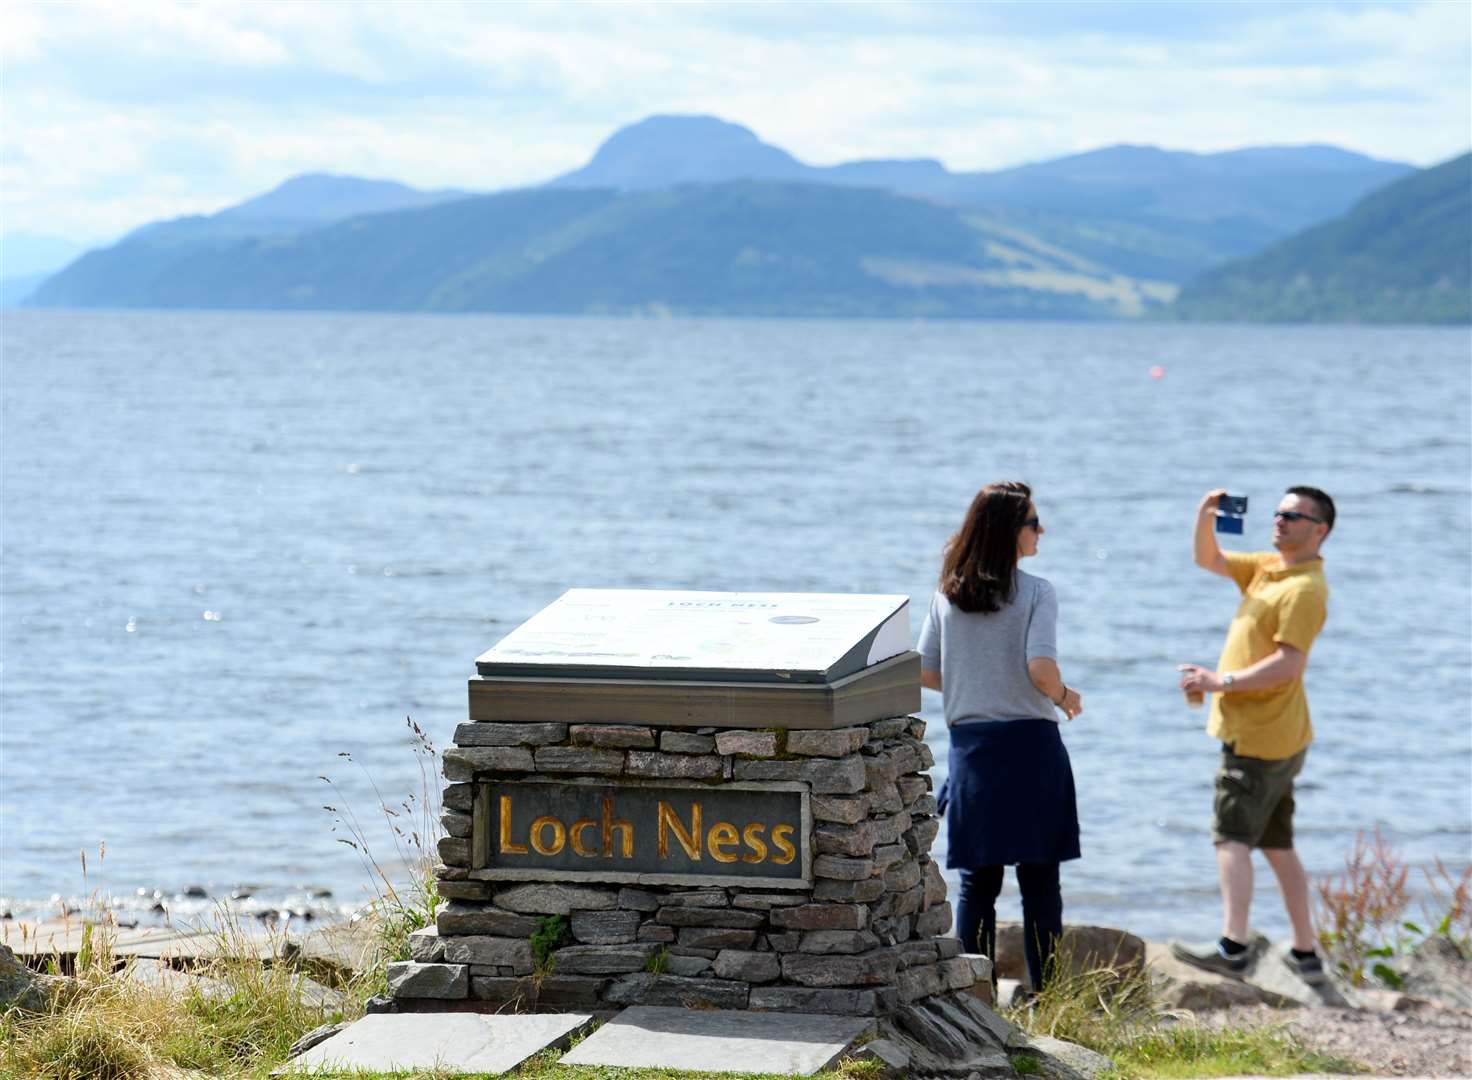 Visitors at Dores beach, Loch Ness continues to be big attraction for tourists.